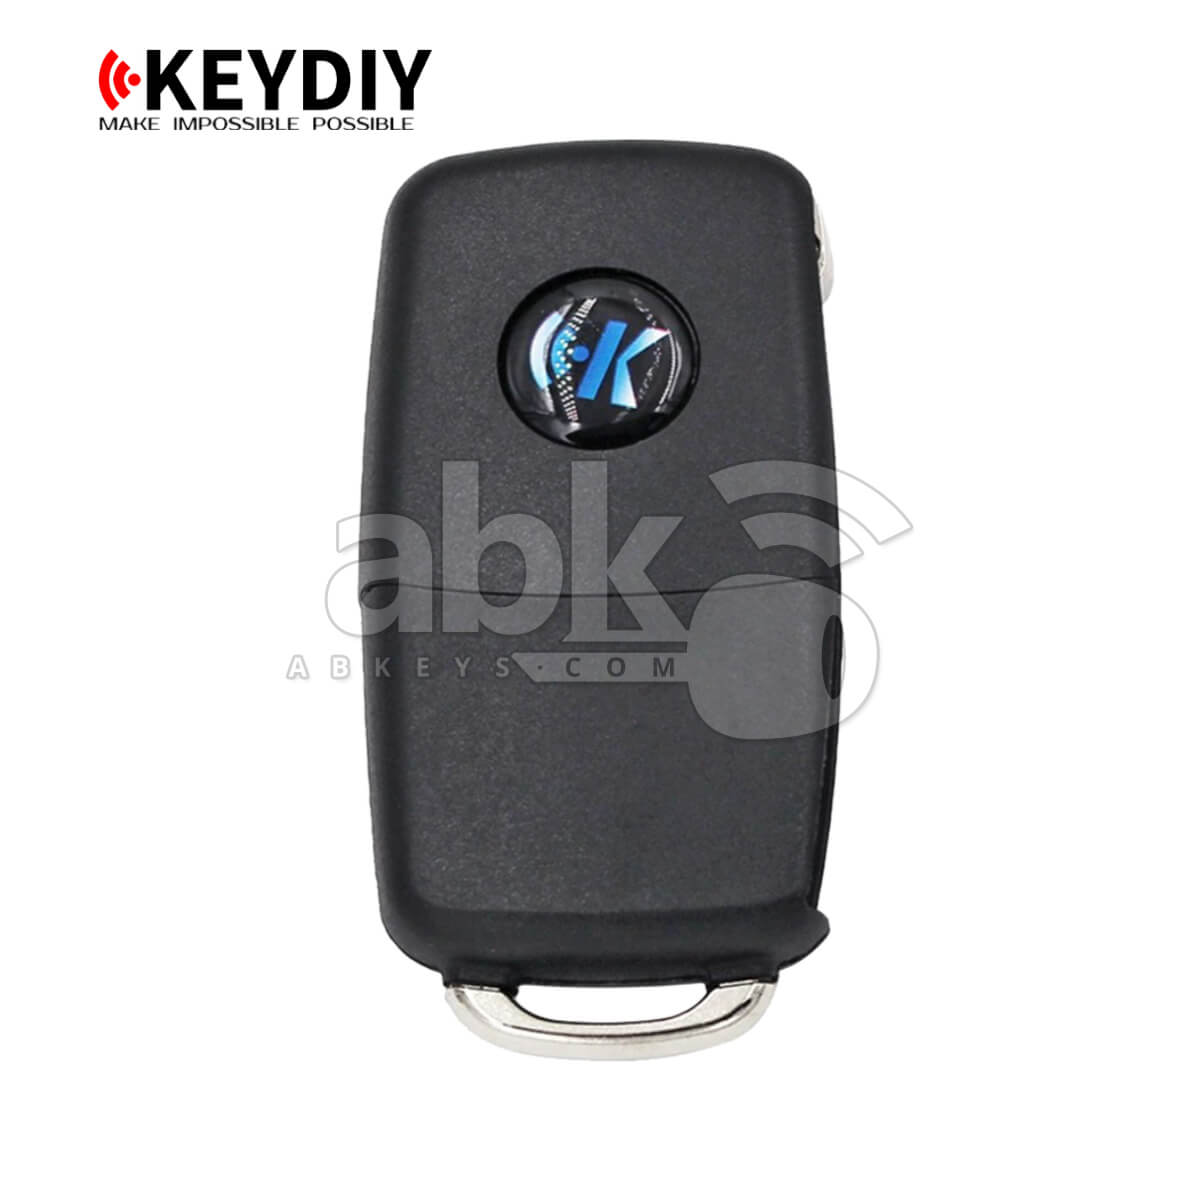 KeyDiy KD Universal Remote NB Series Volkswagen Type With 4Buttons NB08-4